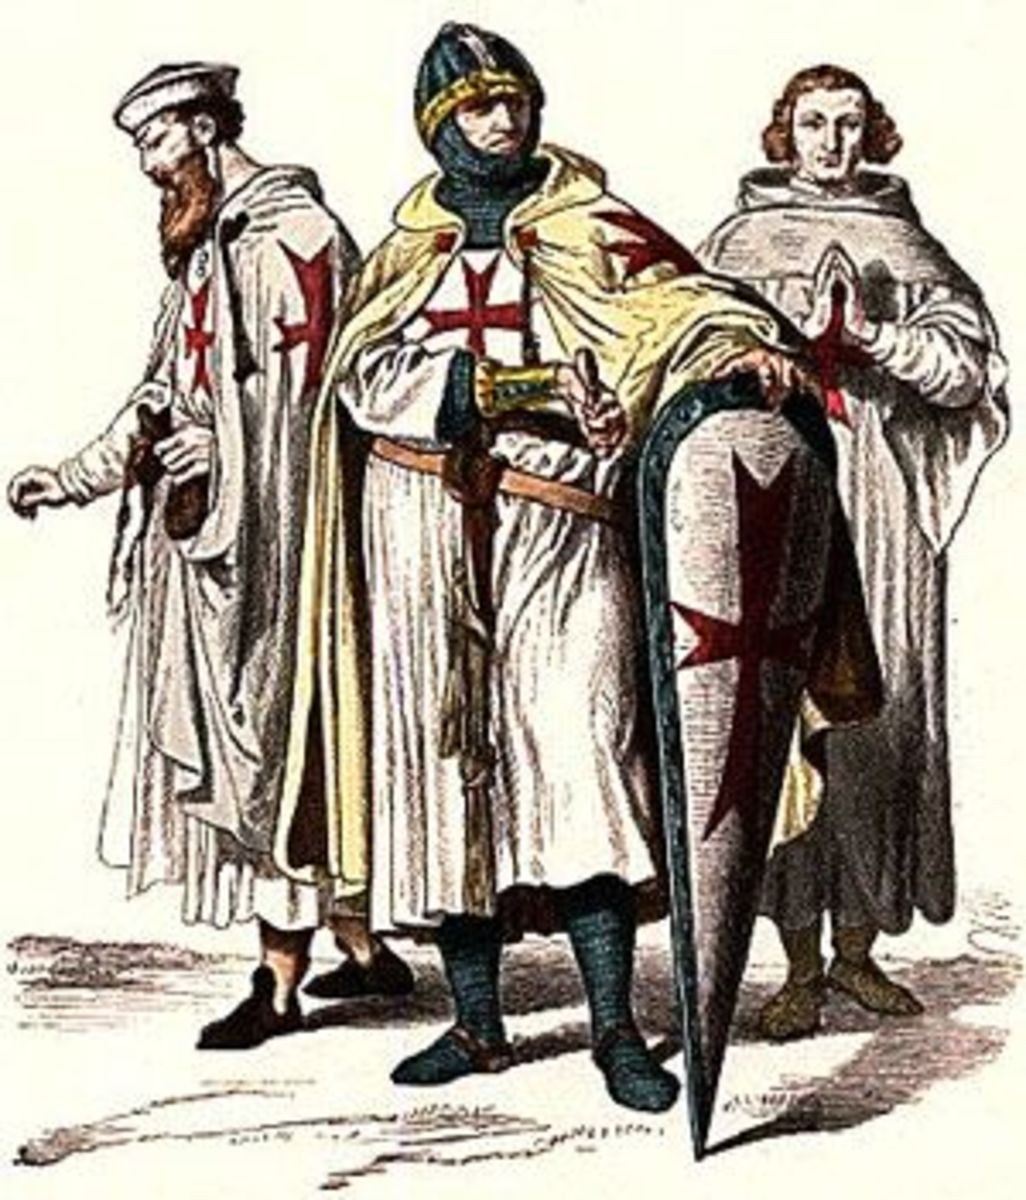 templars-change-the-face-of-knighthood-a-treatise-on-their-rise-and-fall